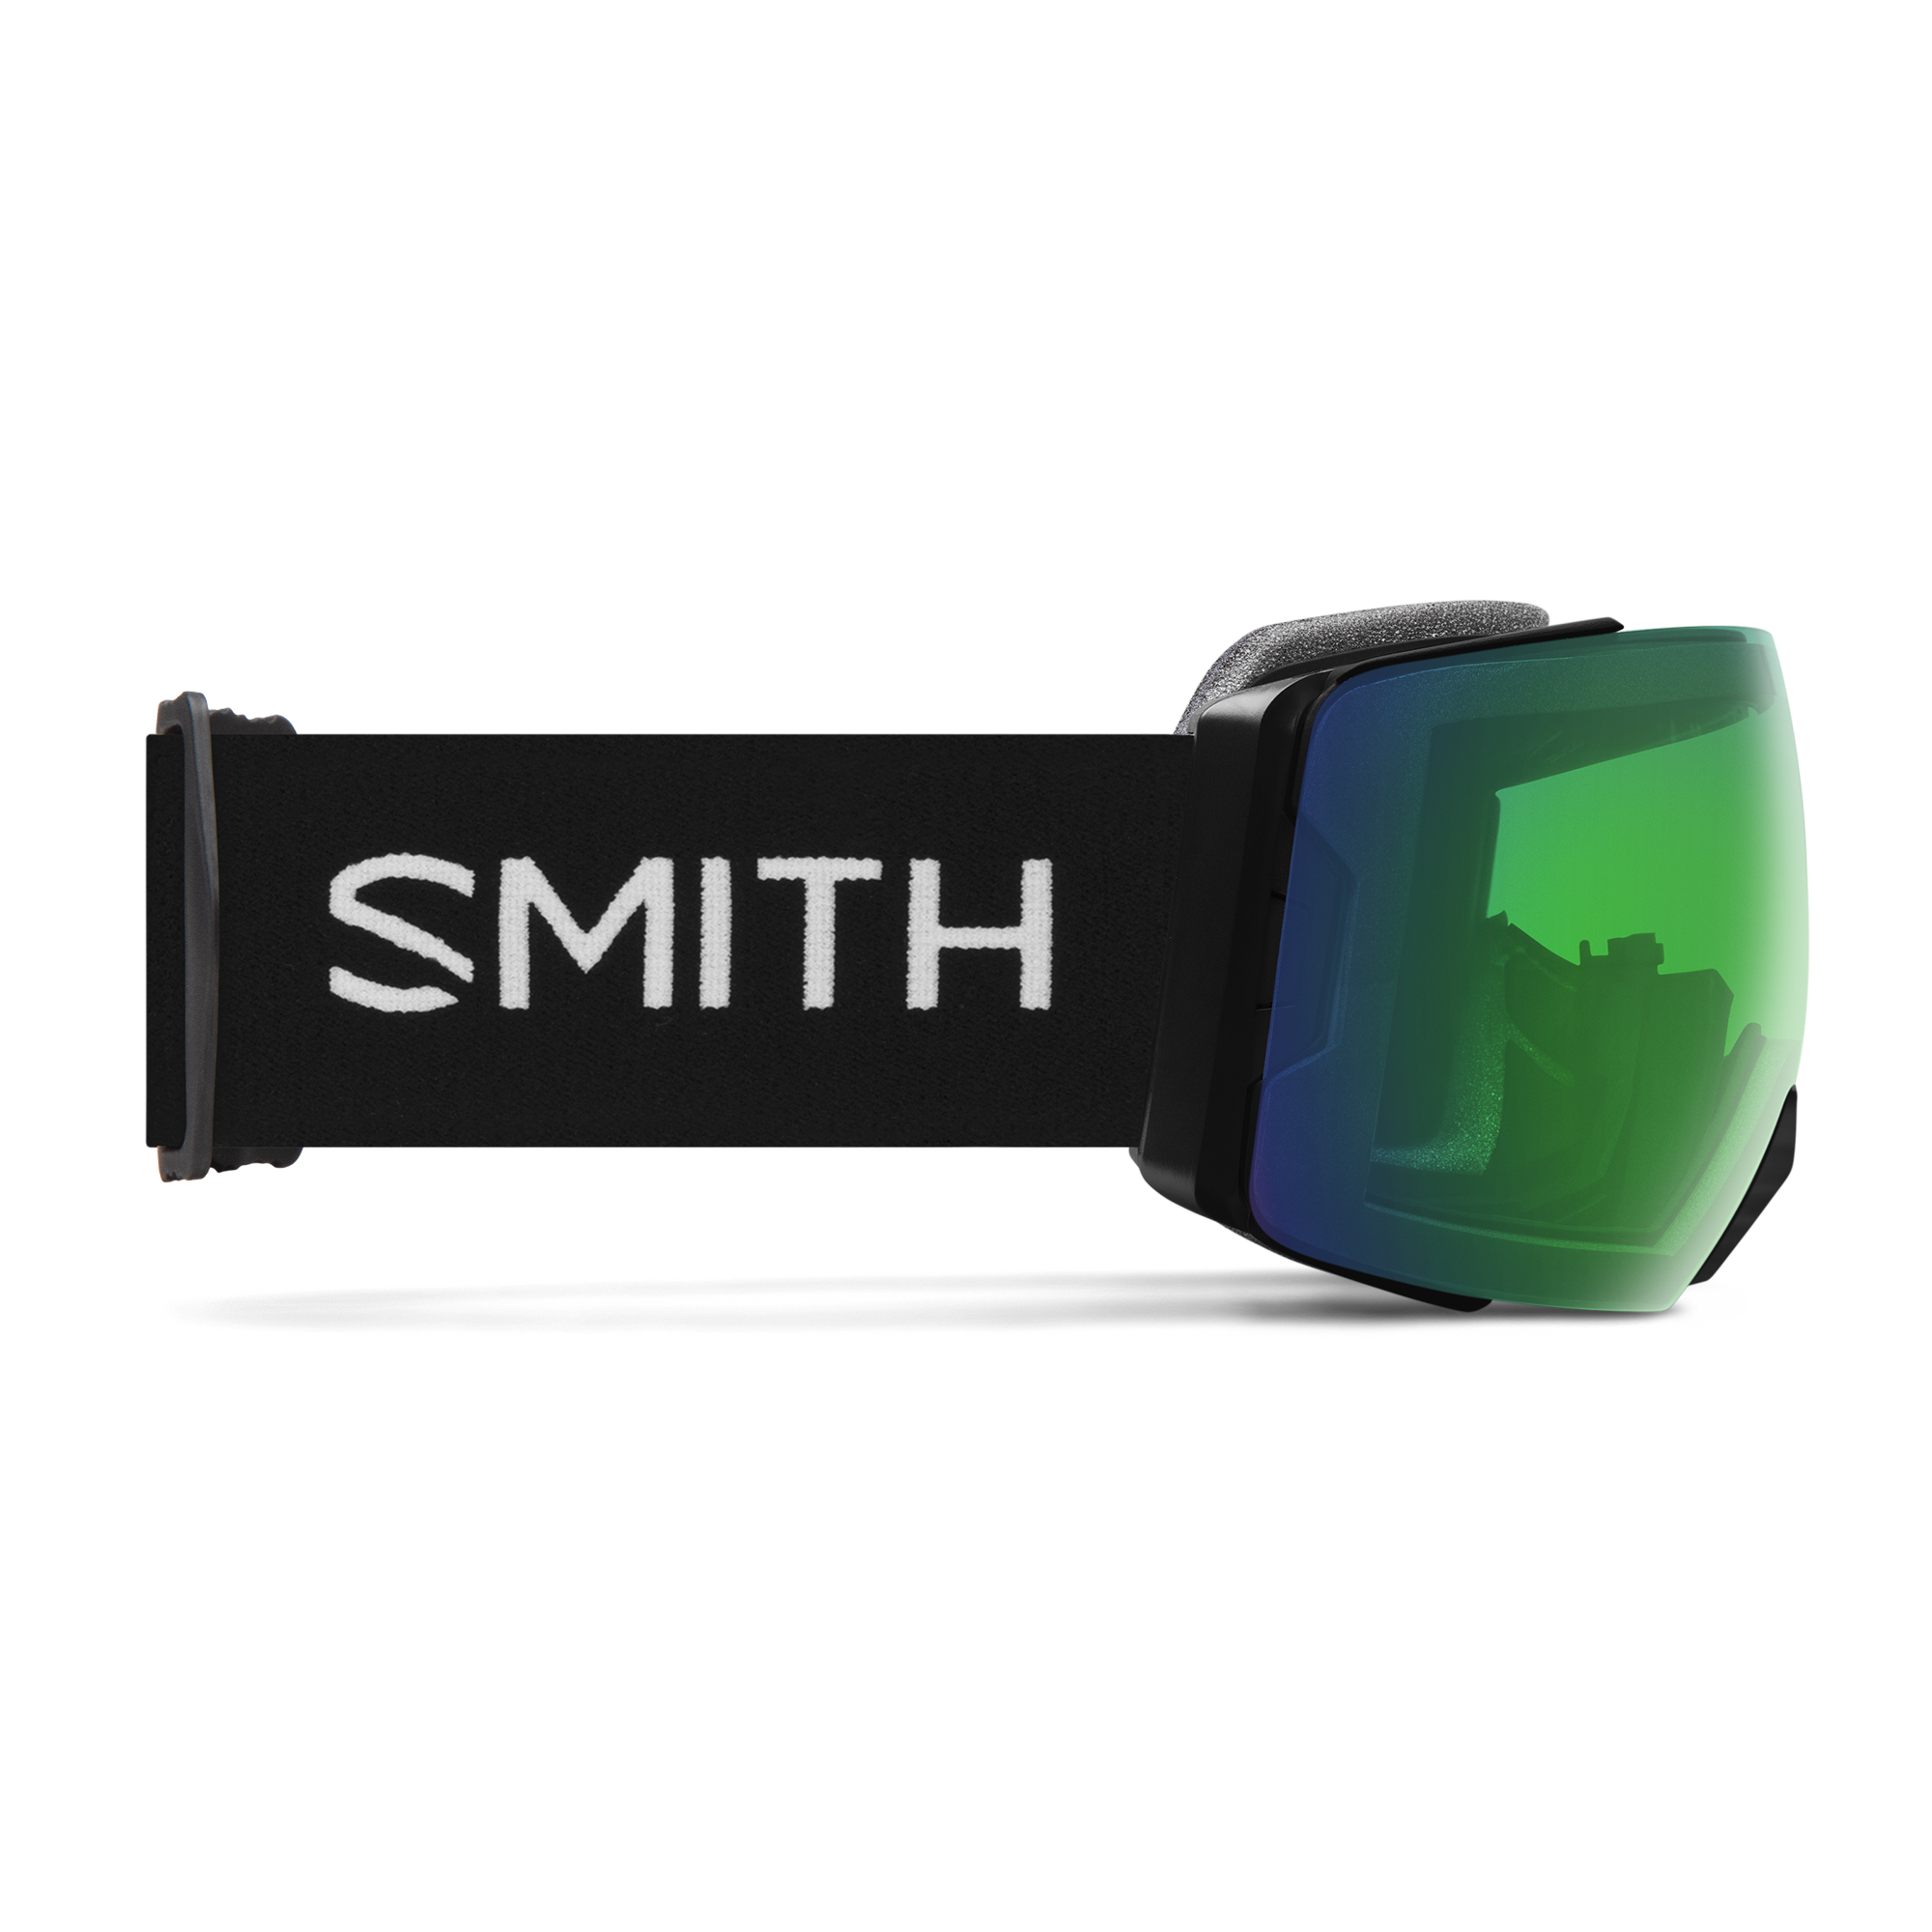 Smith ski goggles with green/blue lenses and black adjustable strap with Smith logo.